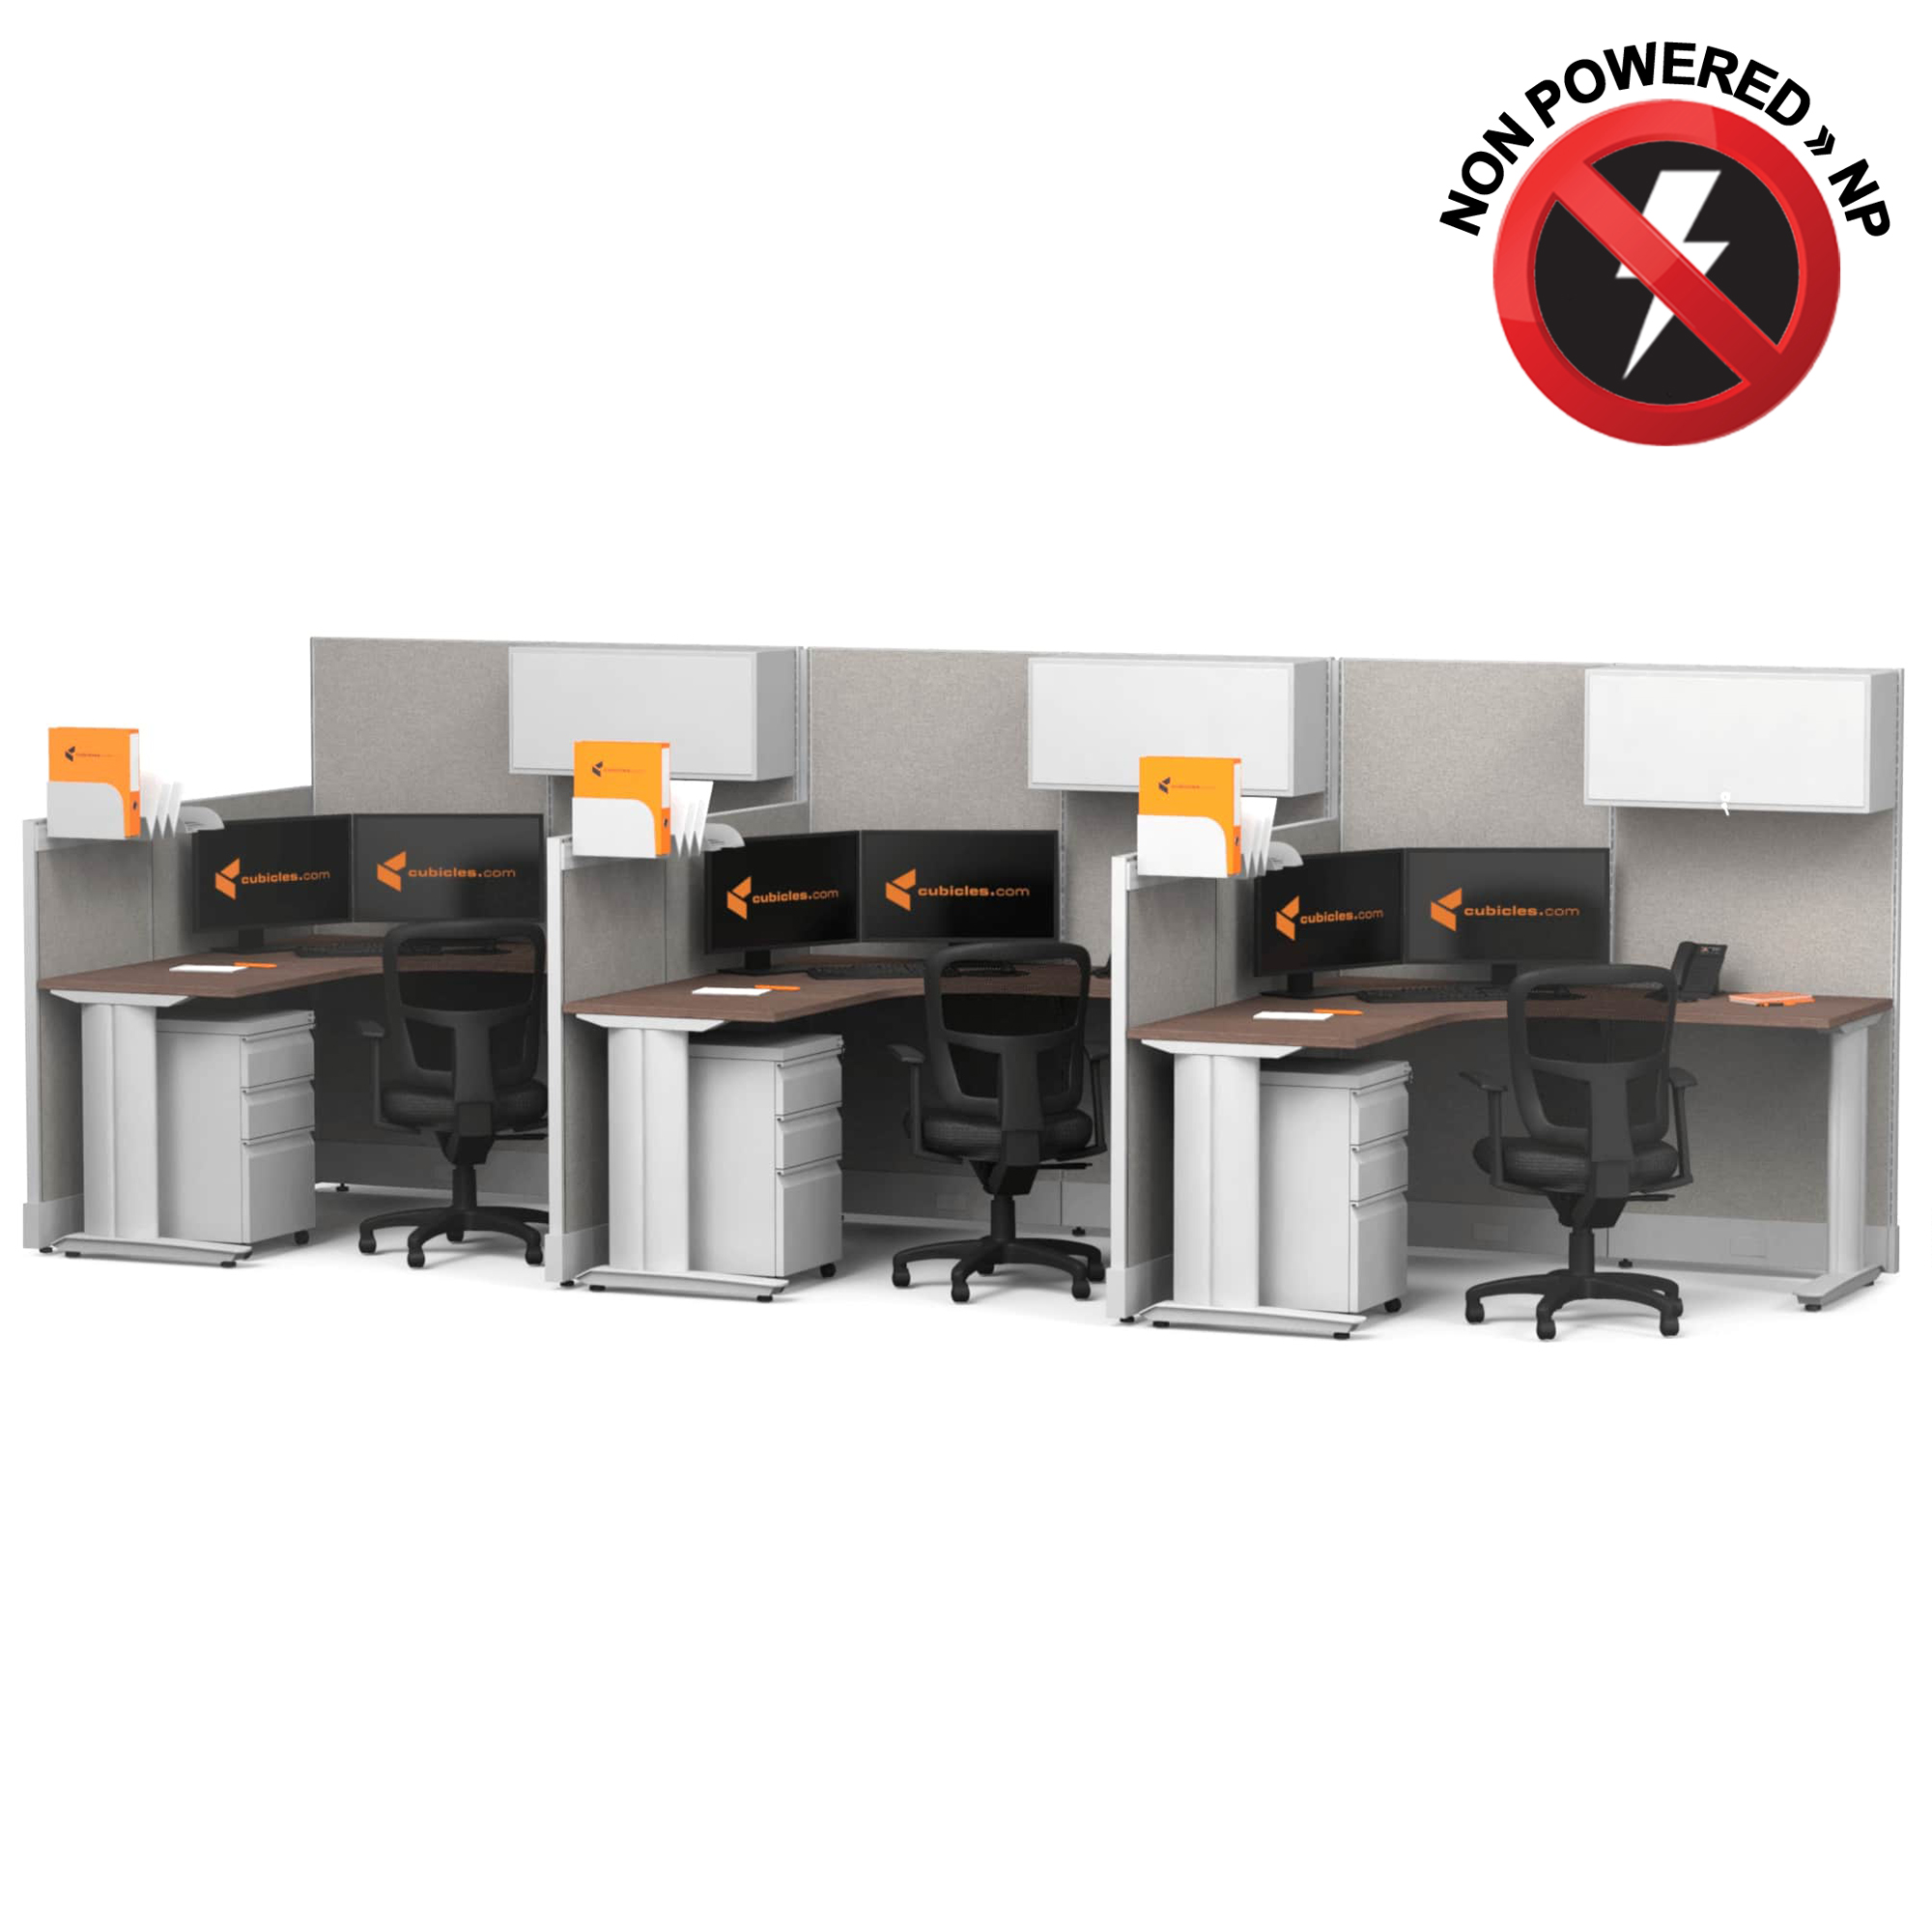 cubicle-desk-l-shaped-workstation-3pack-inline-non-powered-with-storage-sign.jpg